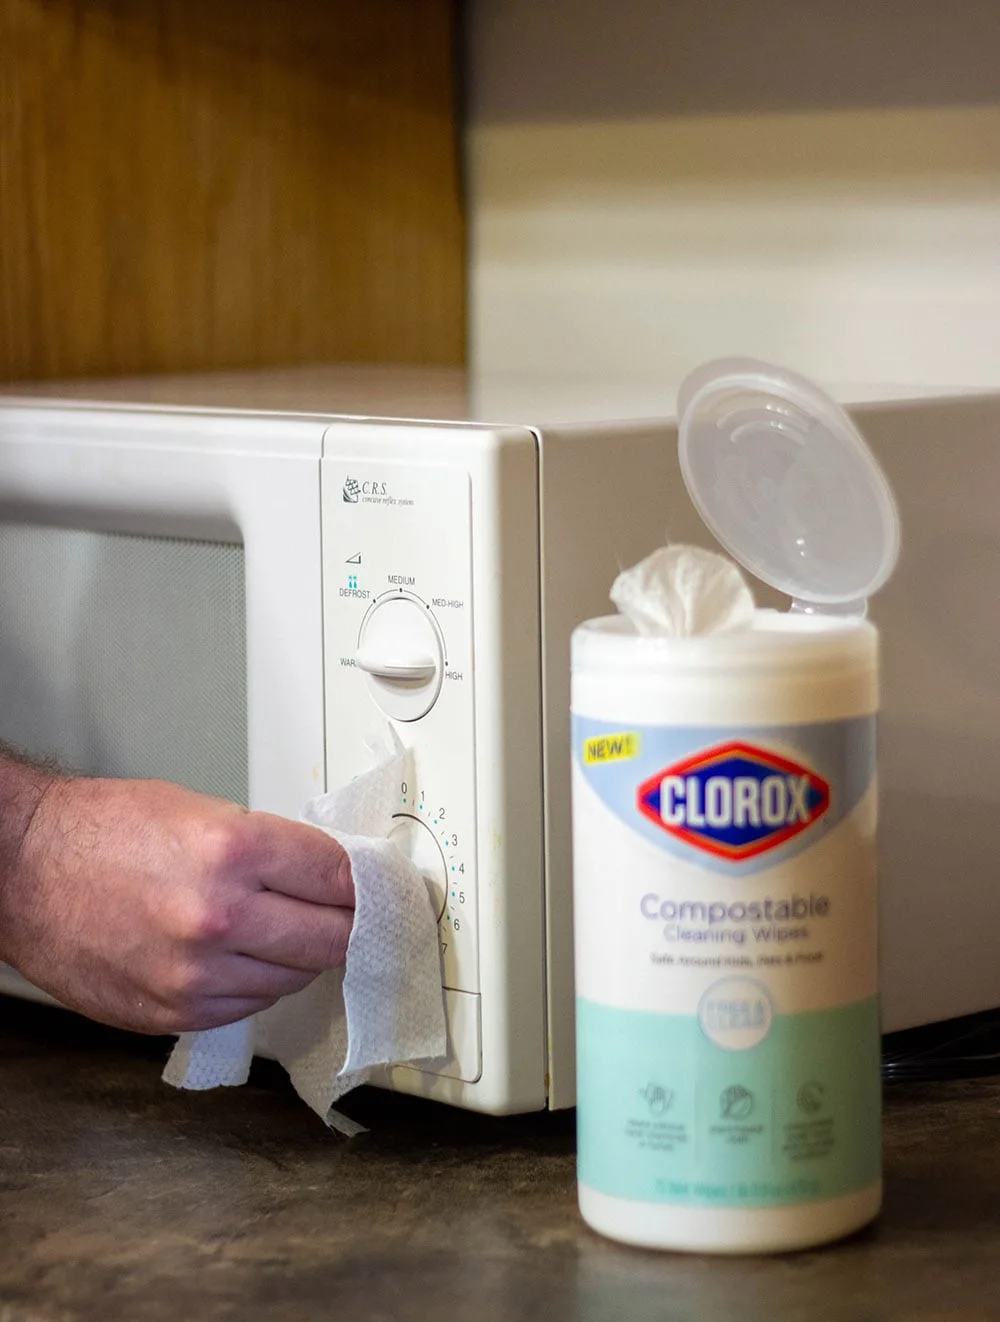 Clorox wipes by the microwave.